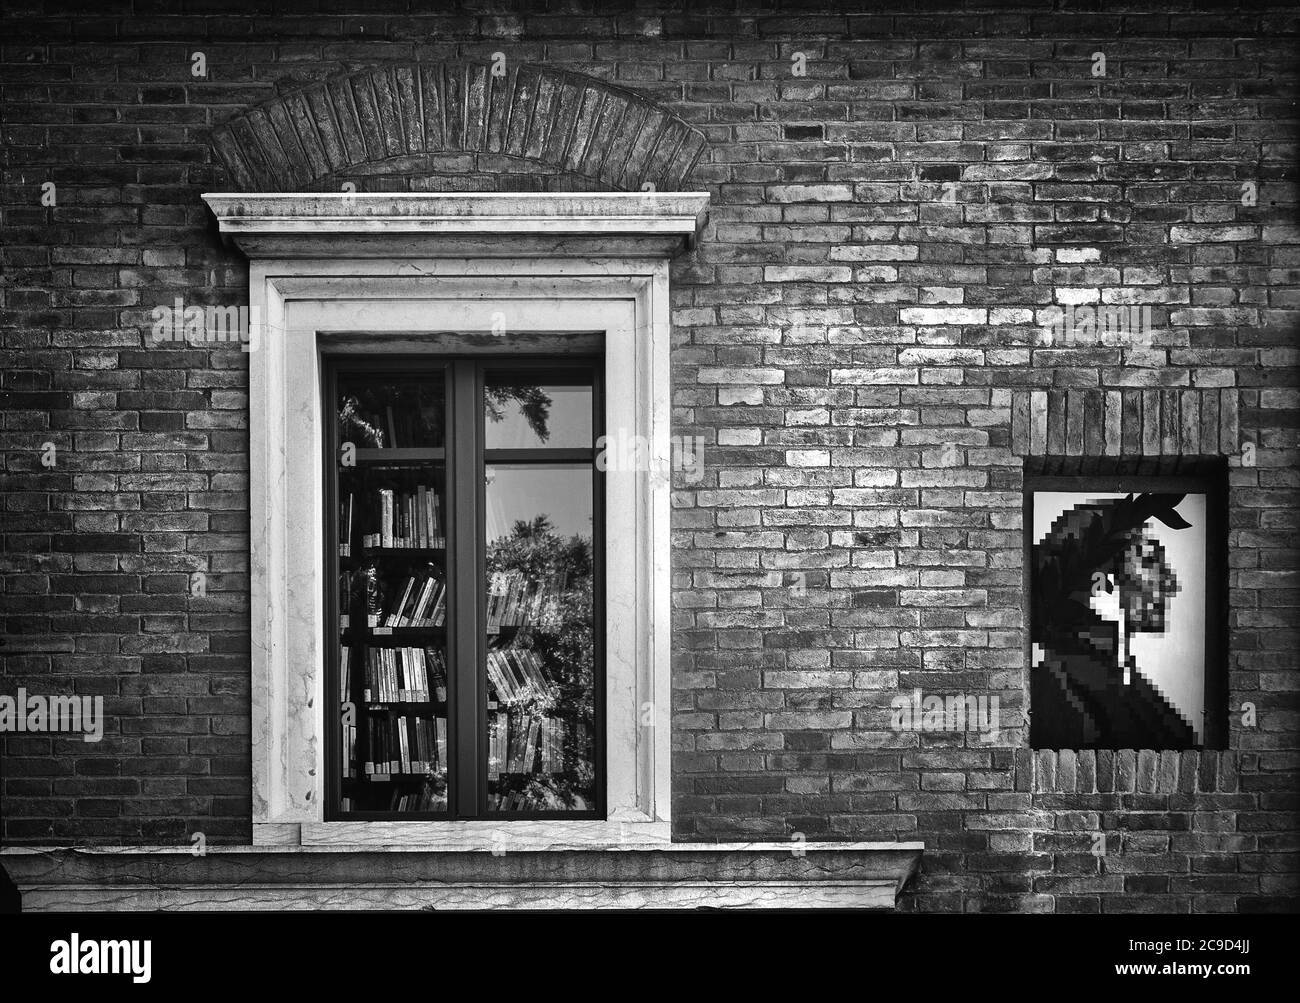 Ravenna, Italy.  July 28, 2020. the window with a bookcase inside with a depiction of Dante Alighieri on the wall of a house Stock Photo